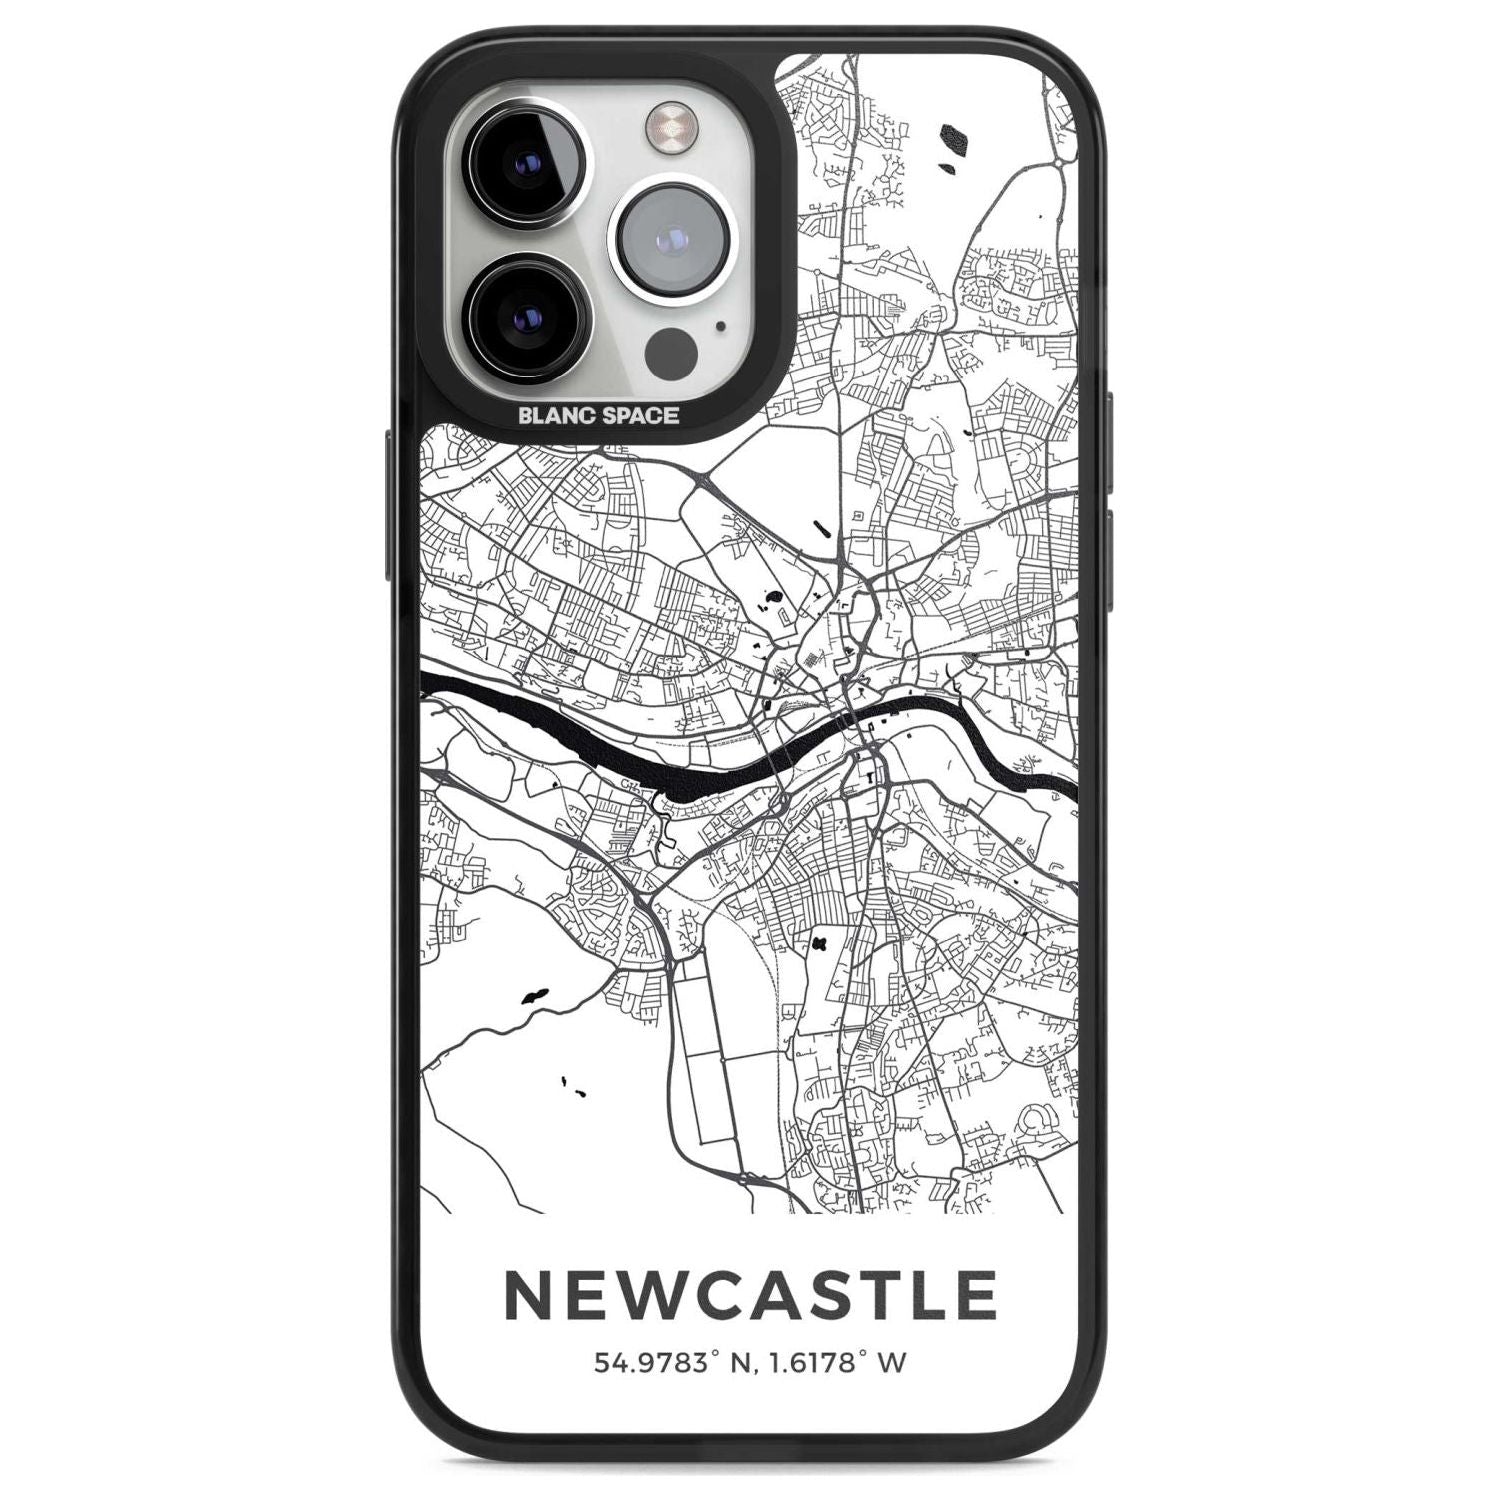 Map of Newcastle, England Phone Case iPhone 13 Pro Max / Magsafe Black Impact Case Blanc Space